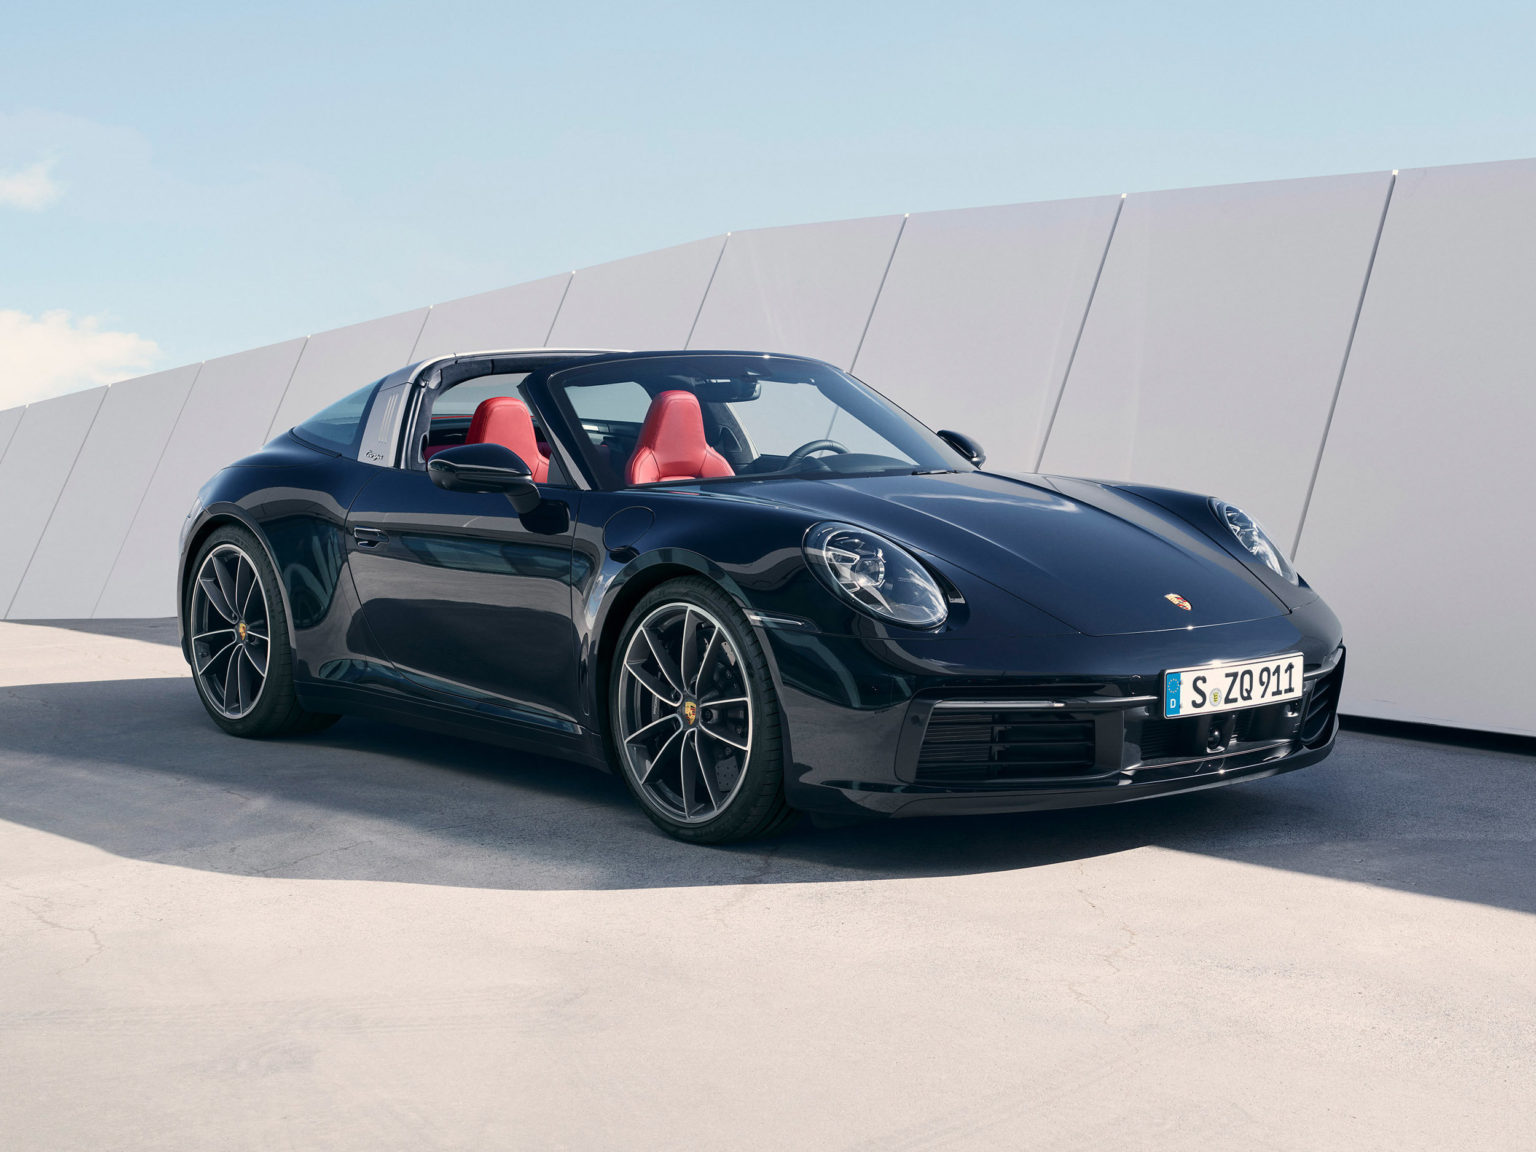 Porche has debuted the latest models in its 911 lineup, the Targa 4 and 4S.